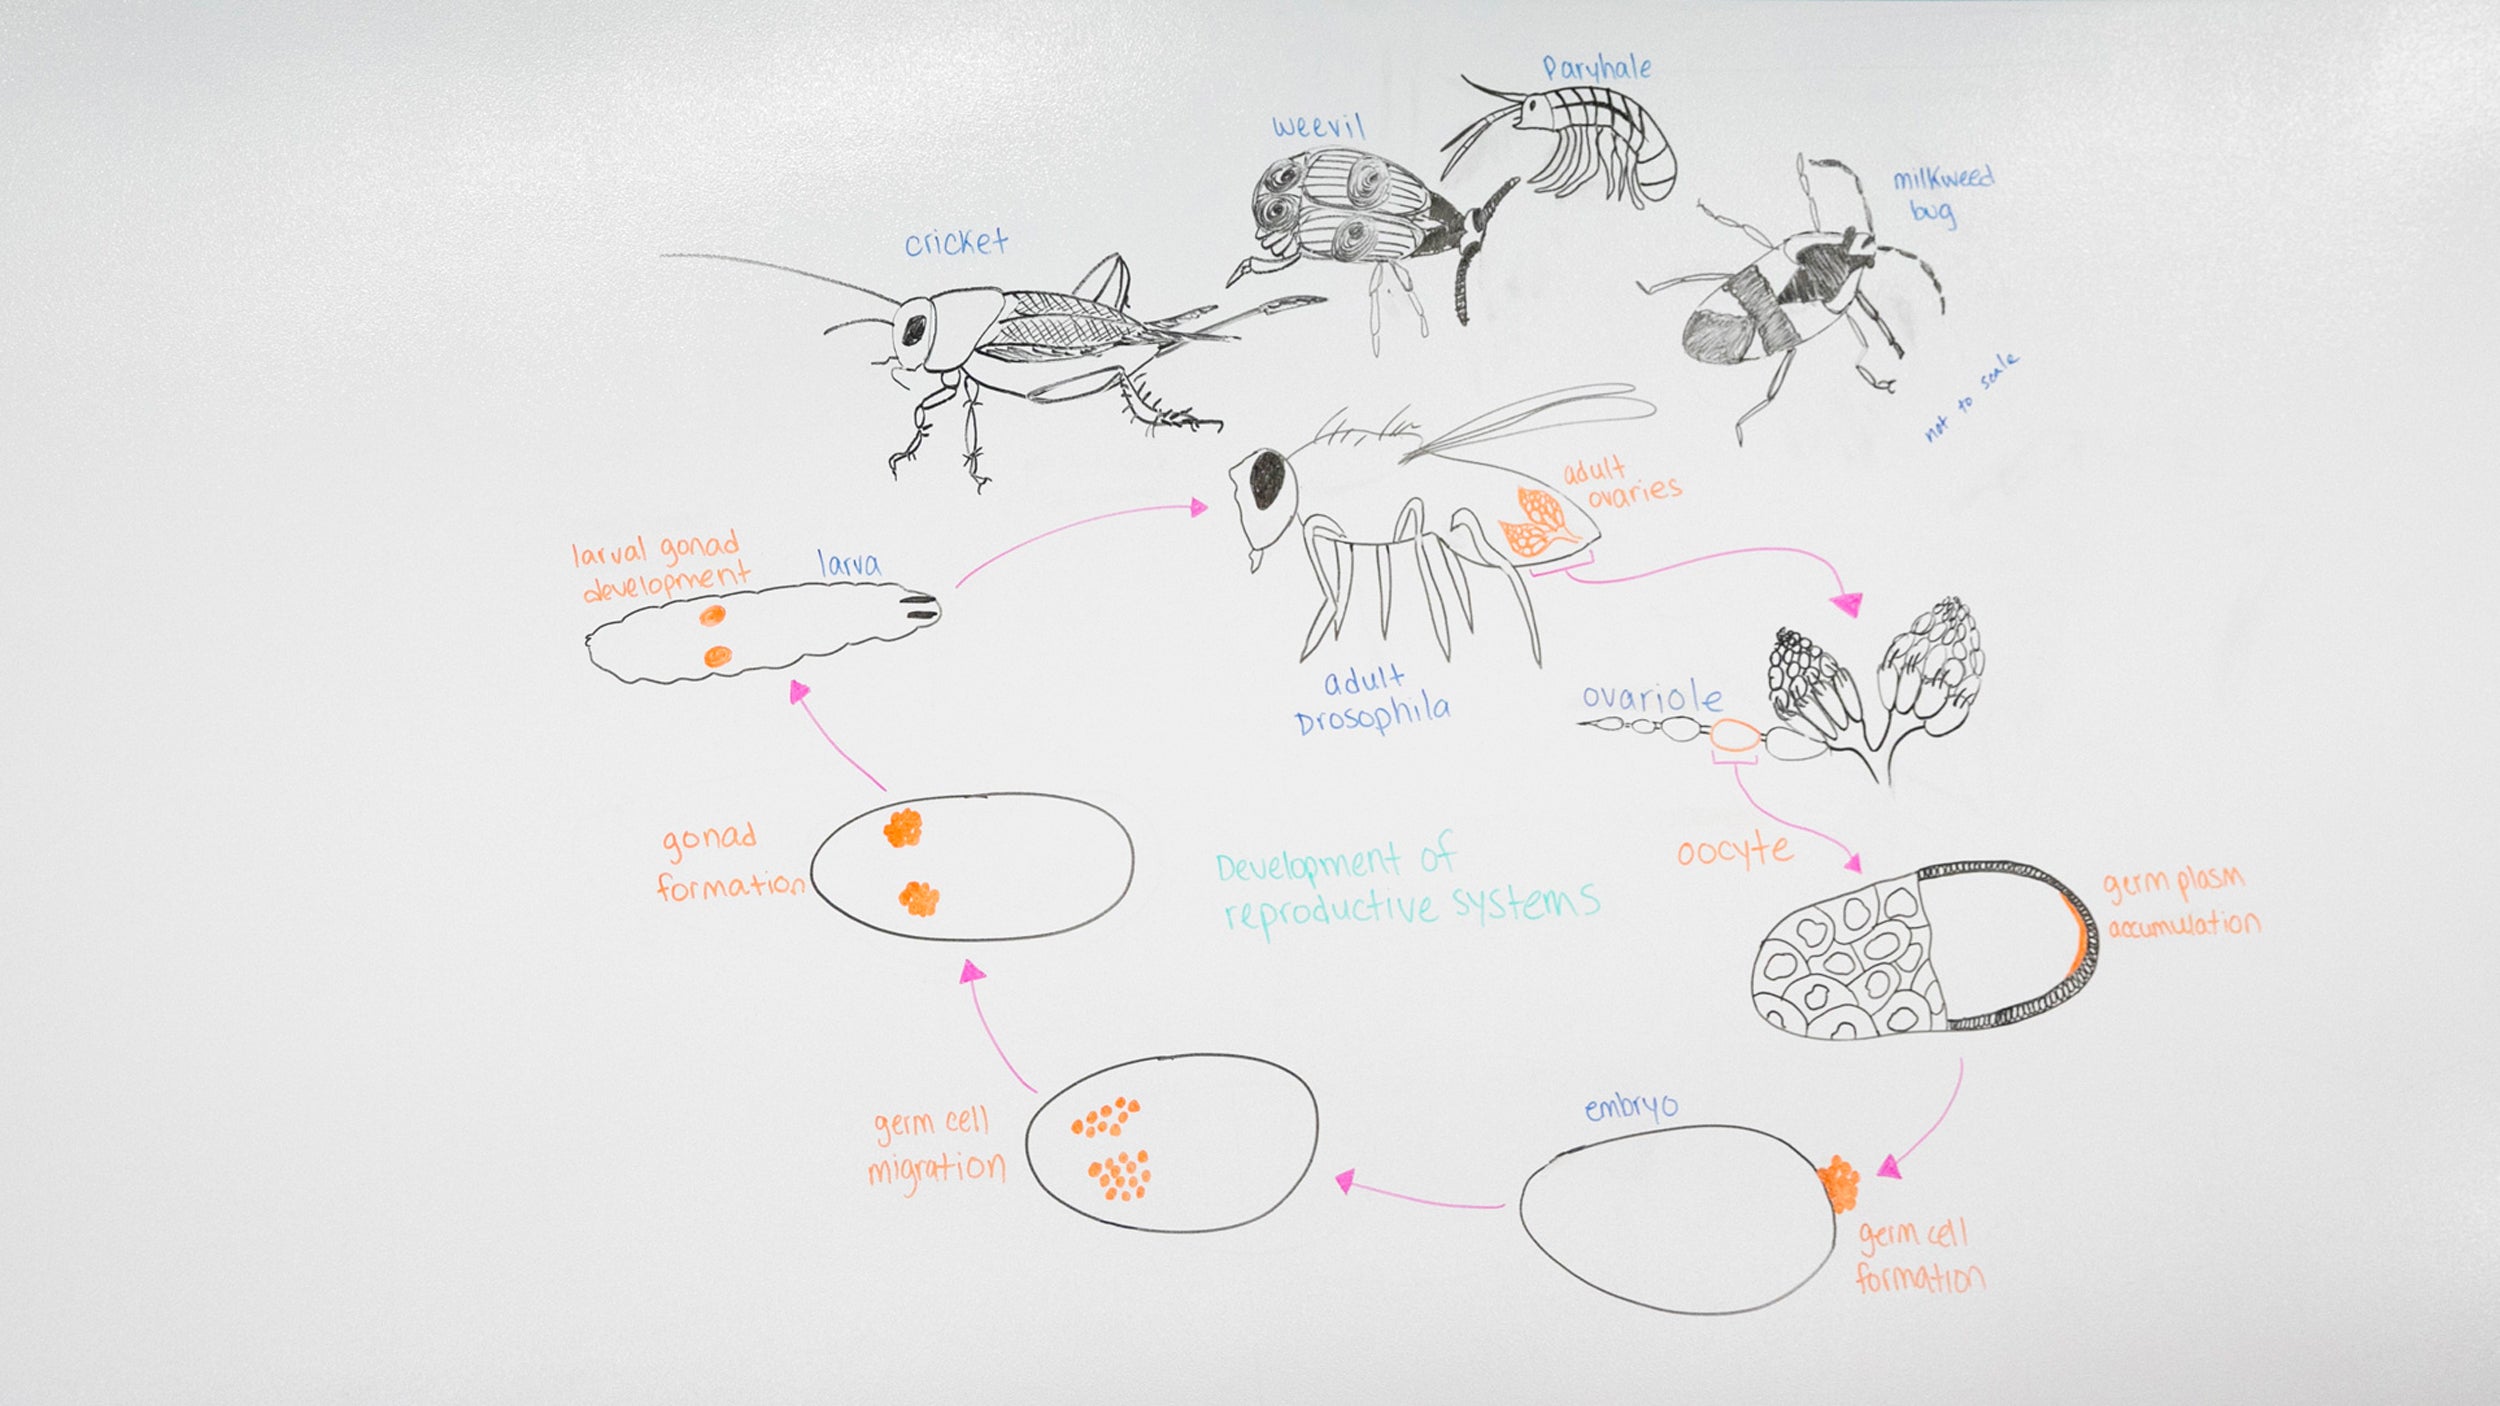 Animal embryos and other drawings on whiteboard.